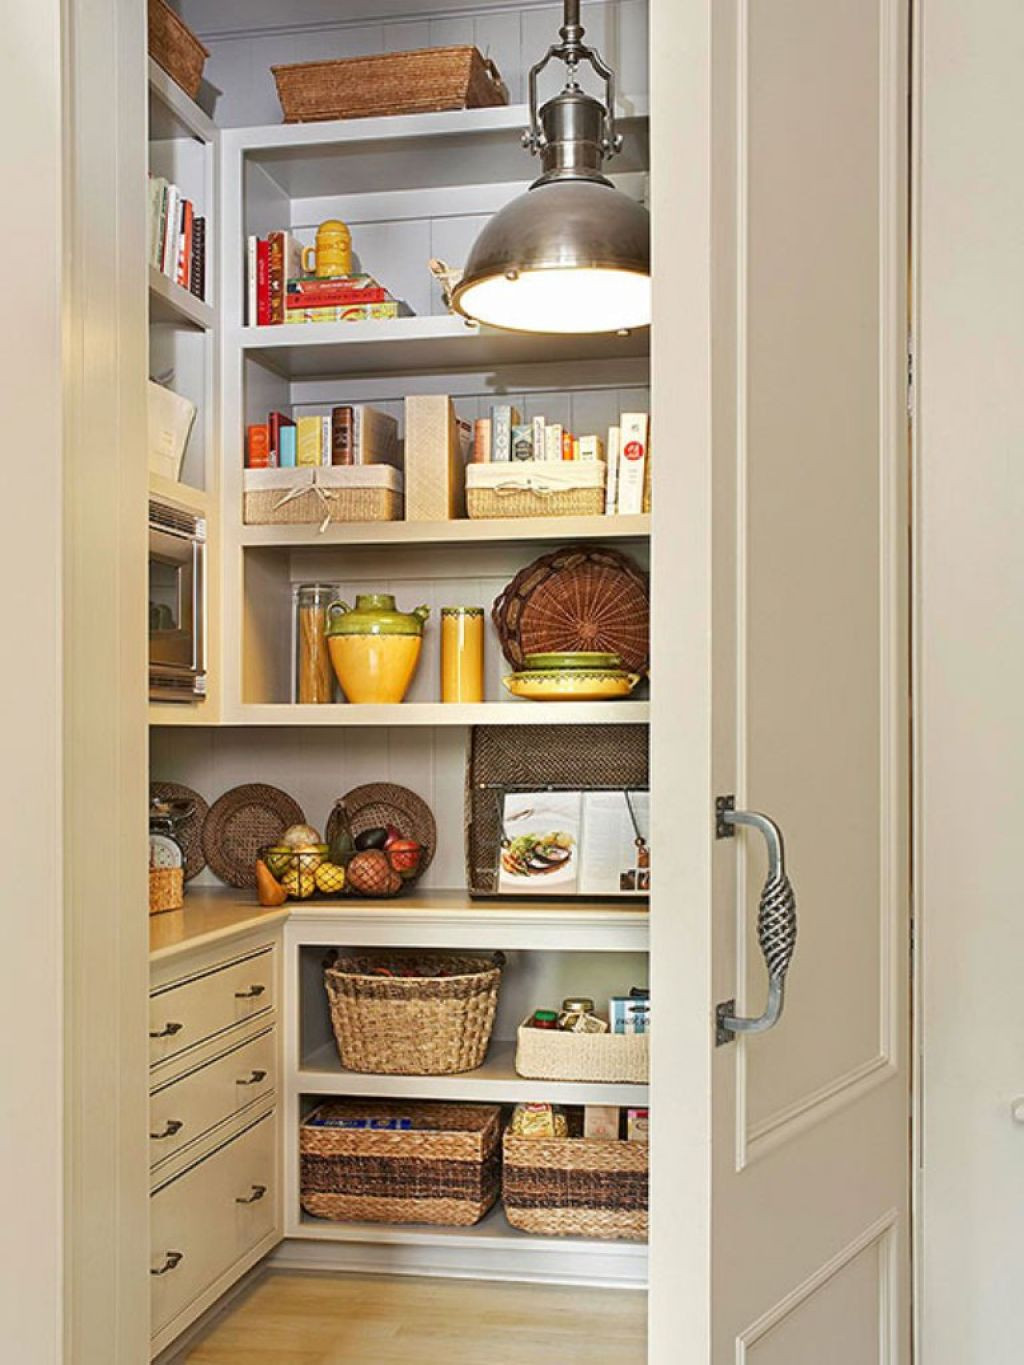 Pantry Ideas For Small Kitchen
 small kitchen pantry ideas Jennies Blog small kitchen